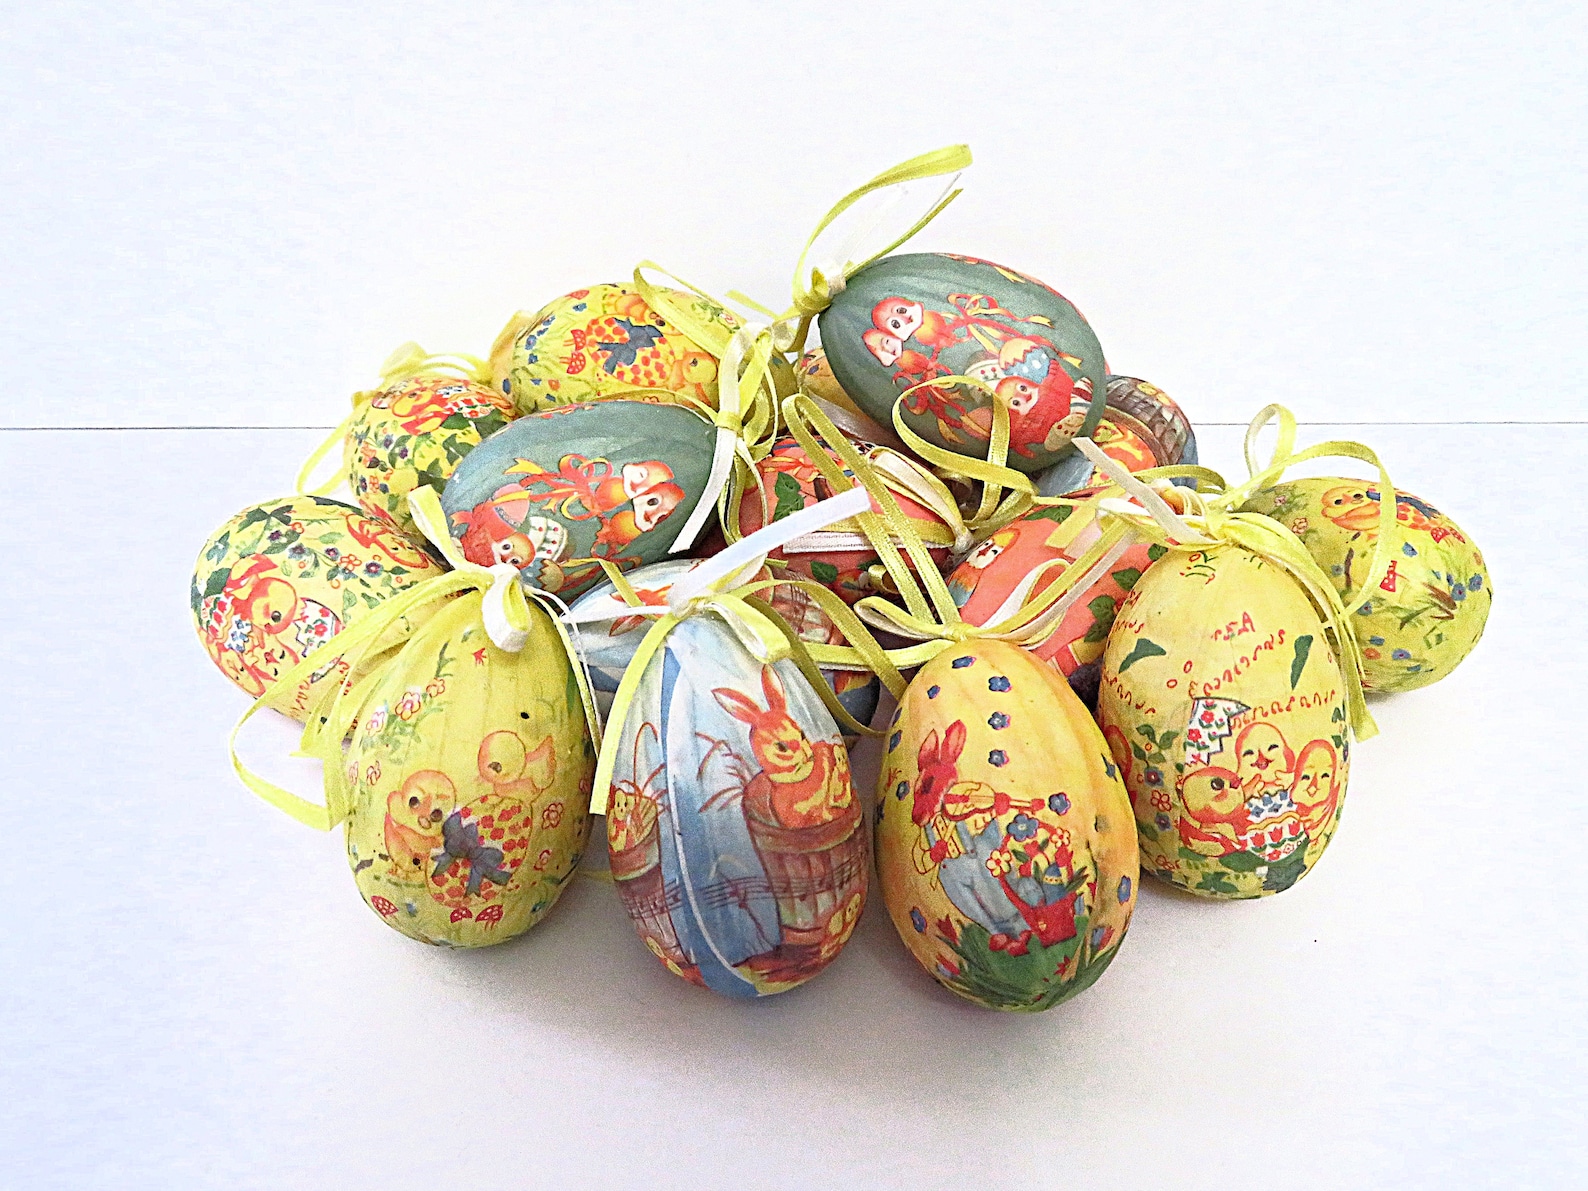 17 vintage Easter egg ornaments, paper wrapped and ribbon tied, pastel colors, chicks and bunnies, Easter decor, Easter eggs